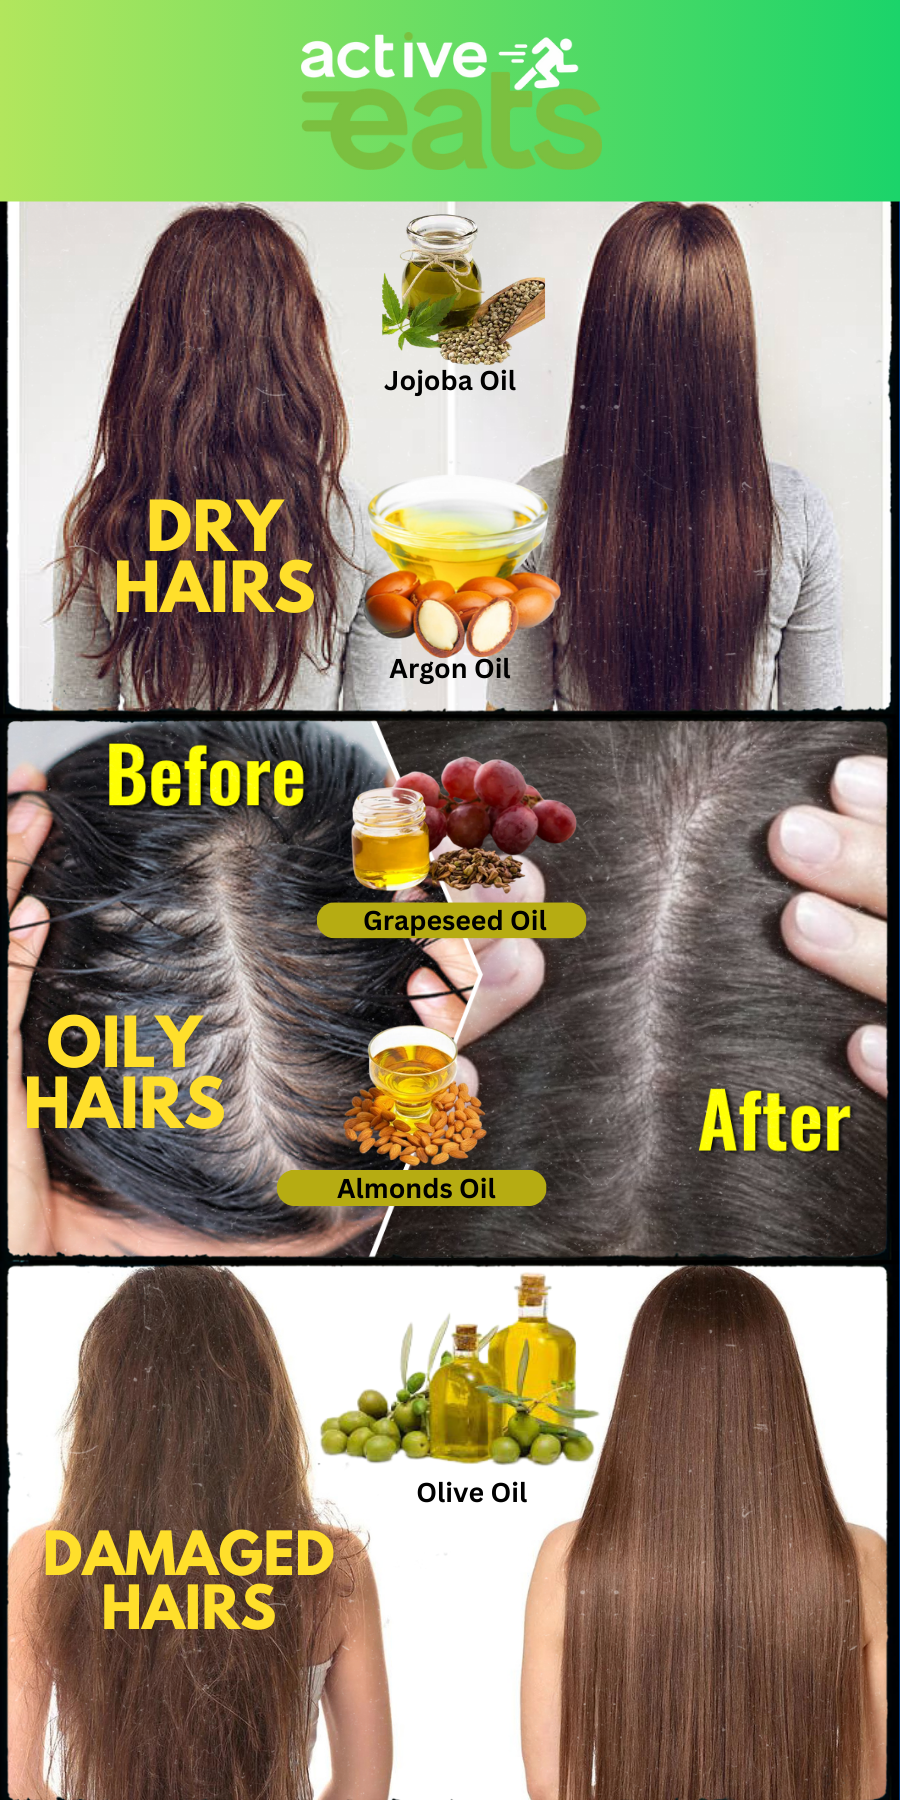 Image of a girl with dry hairs and using argon oil and jojoba oil for silky smooth hairs, and girl with oily hairs using grapeseed oil and almond oil for silky hairs and girl with damaged hairs using oilve oils for beautiful hairs.